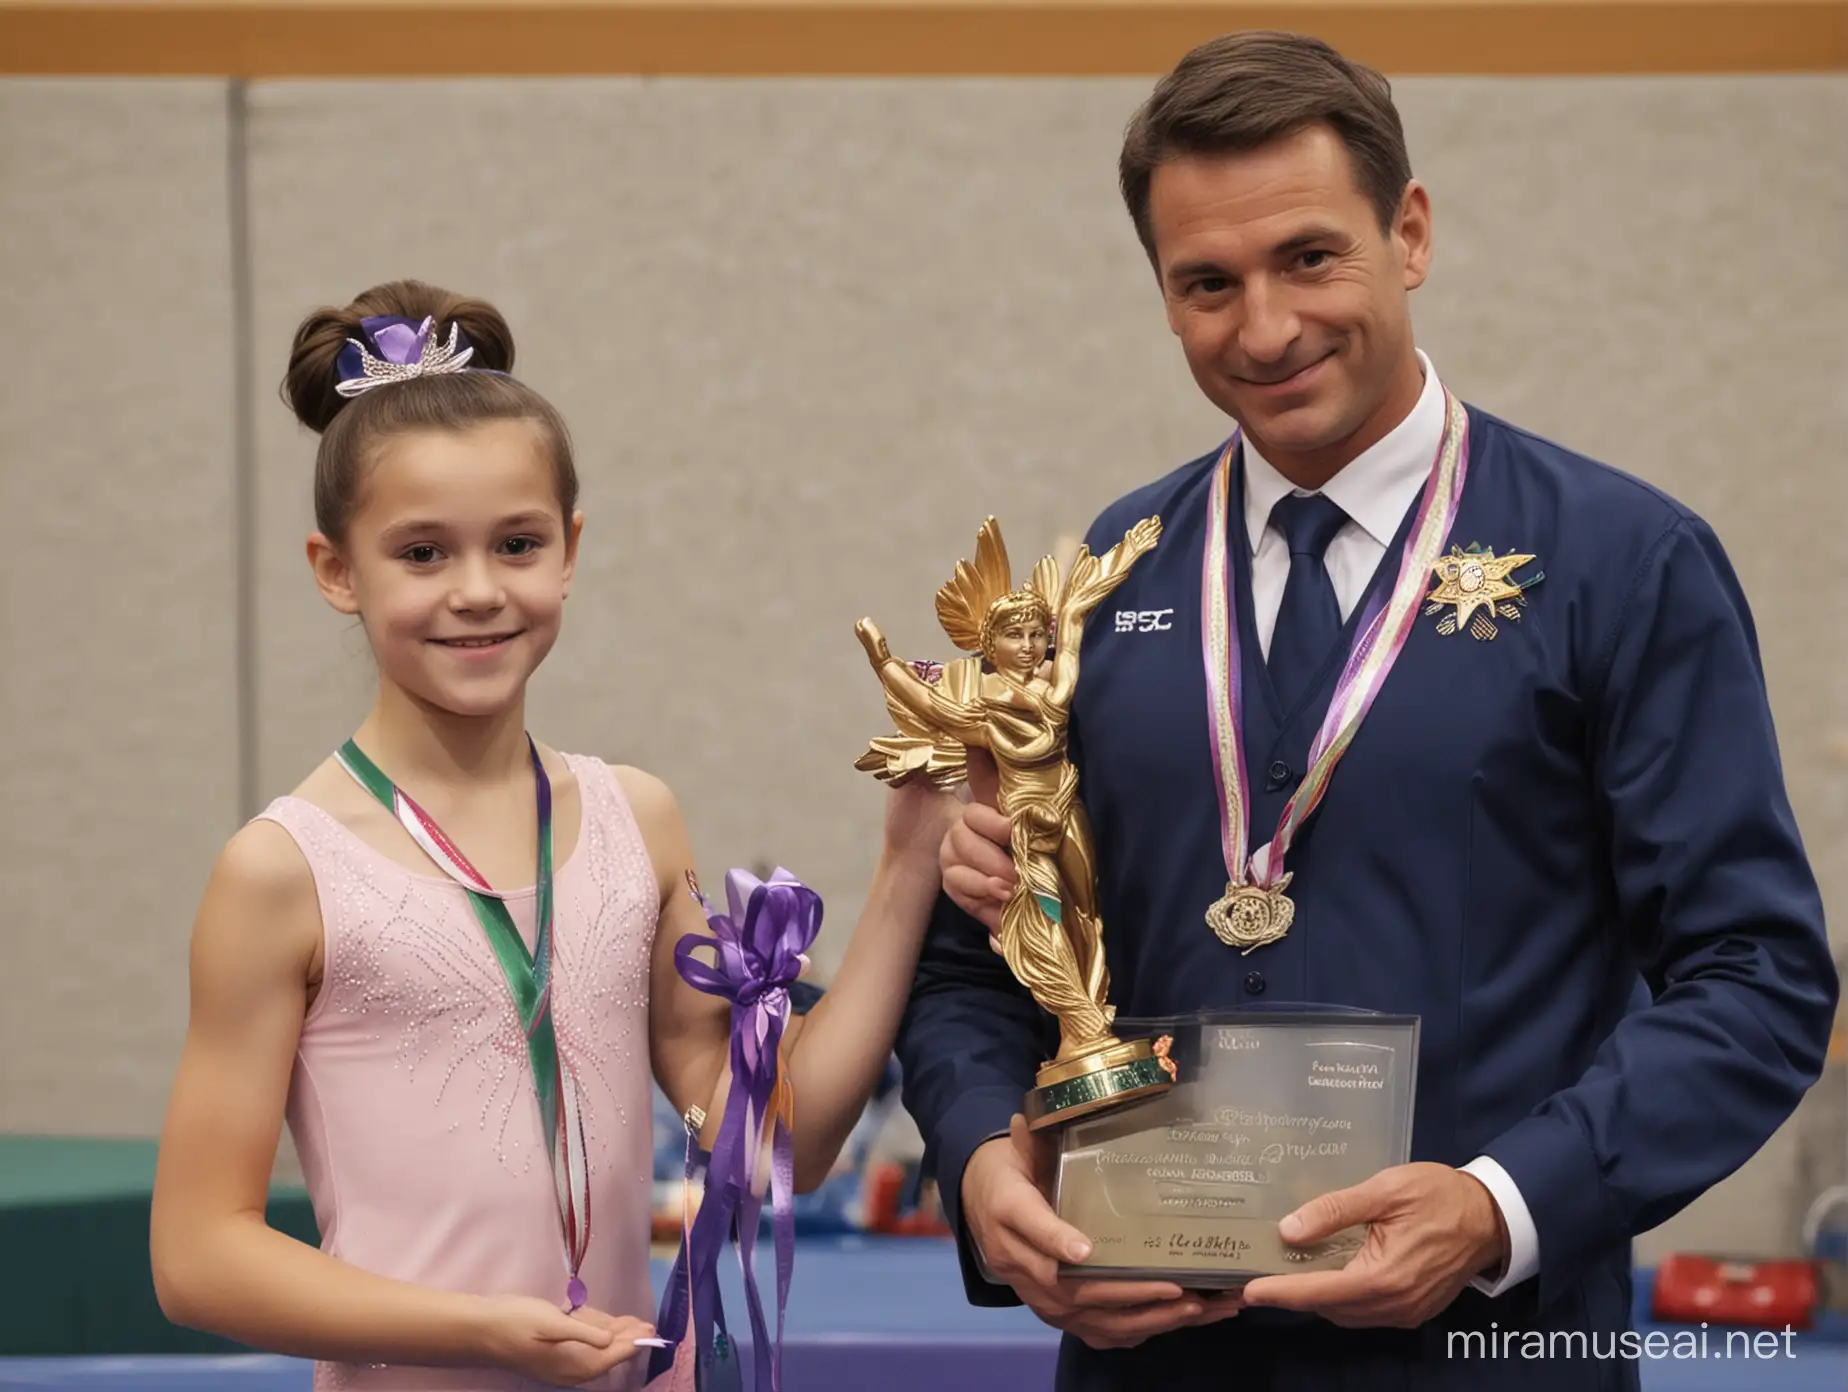 Young Gymnast Triumphs at Gymnastics Awards with Supportive Coach